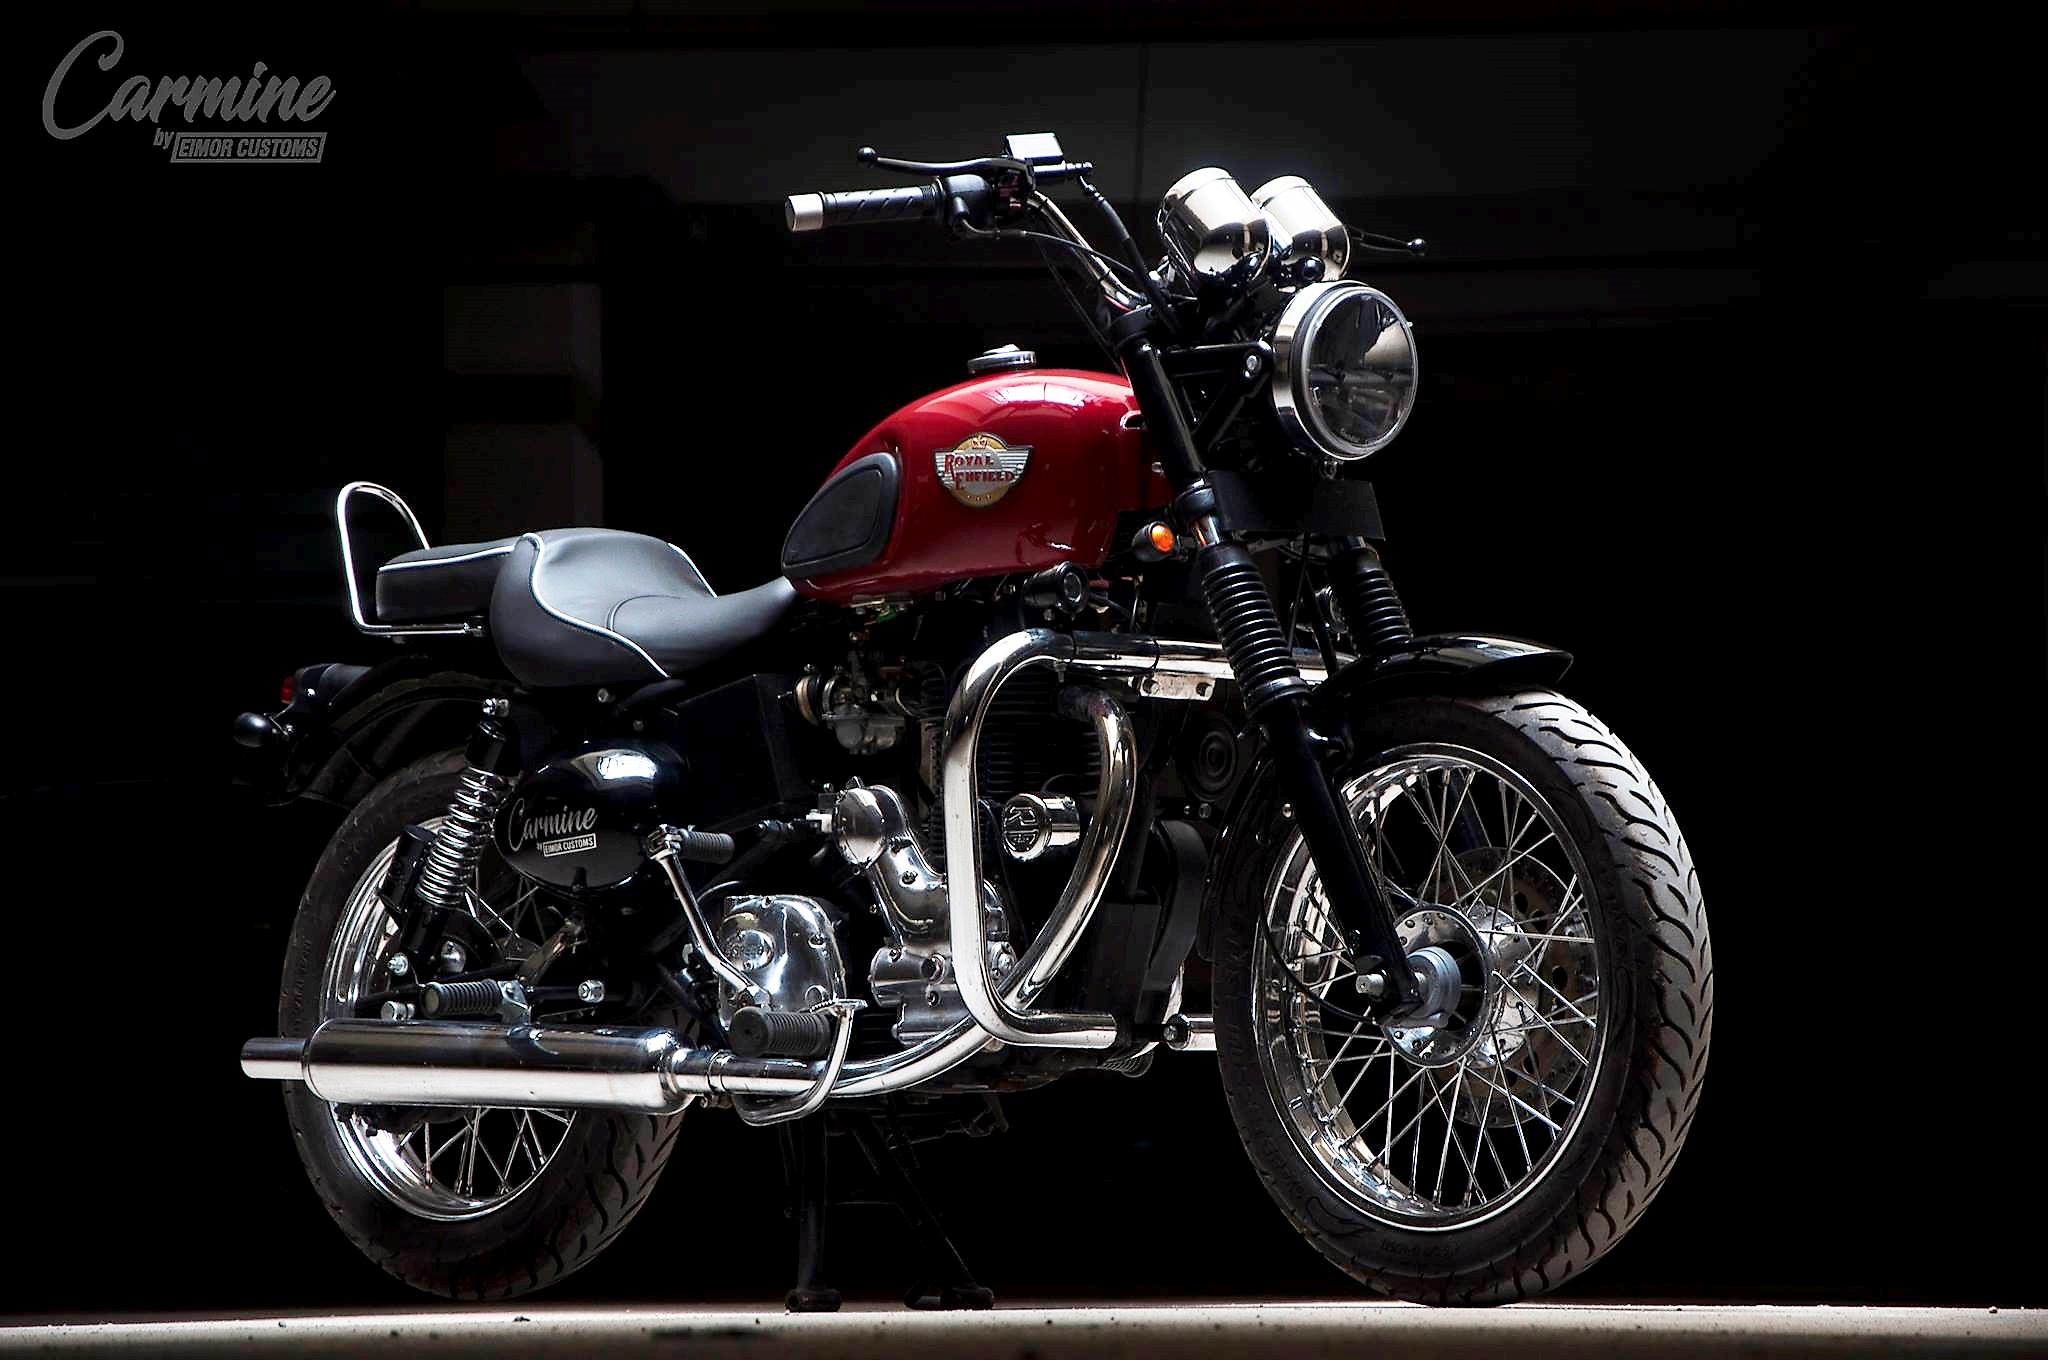 Meet Royal Enfield Carmine 350 Equipped with Premium Parts - midground